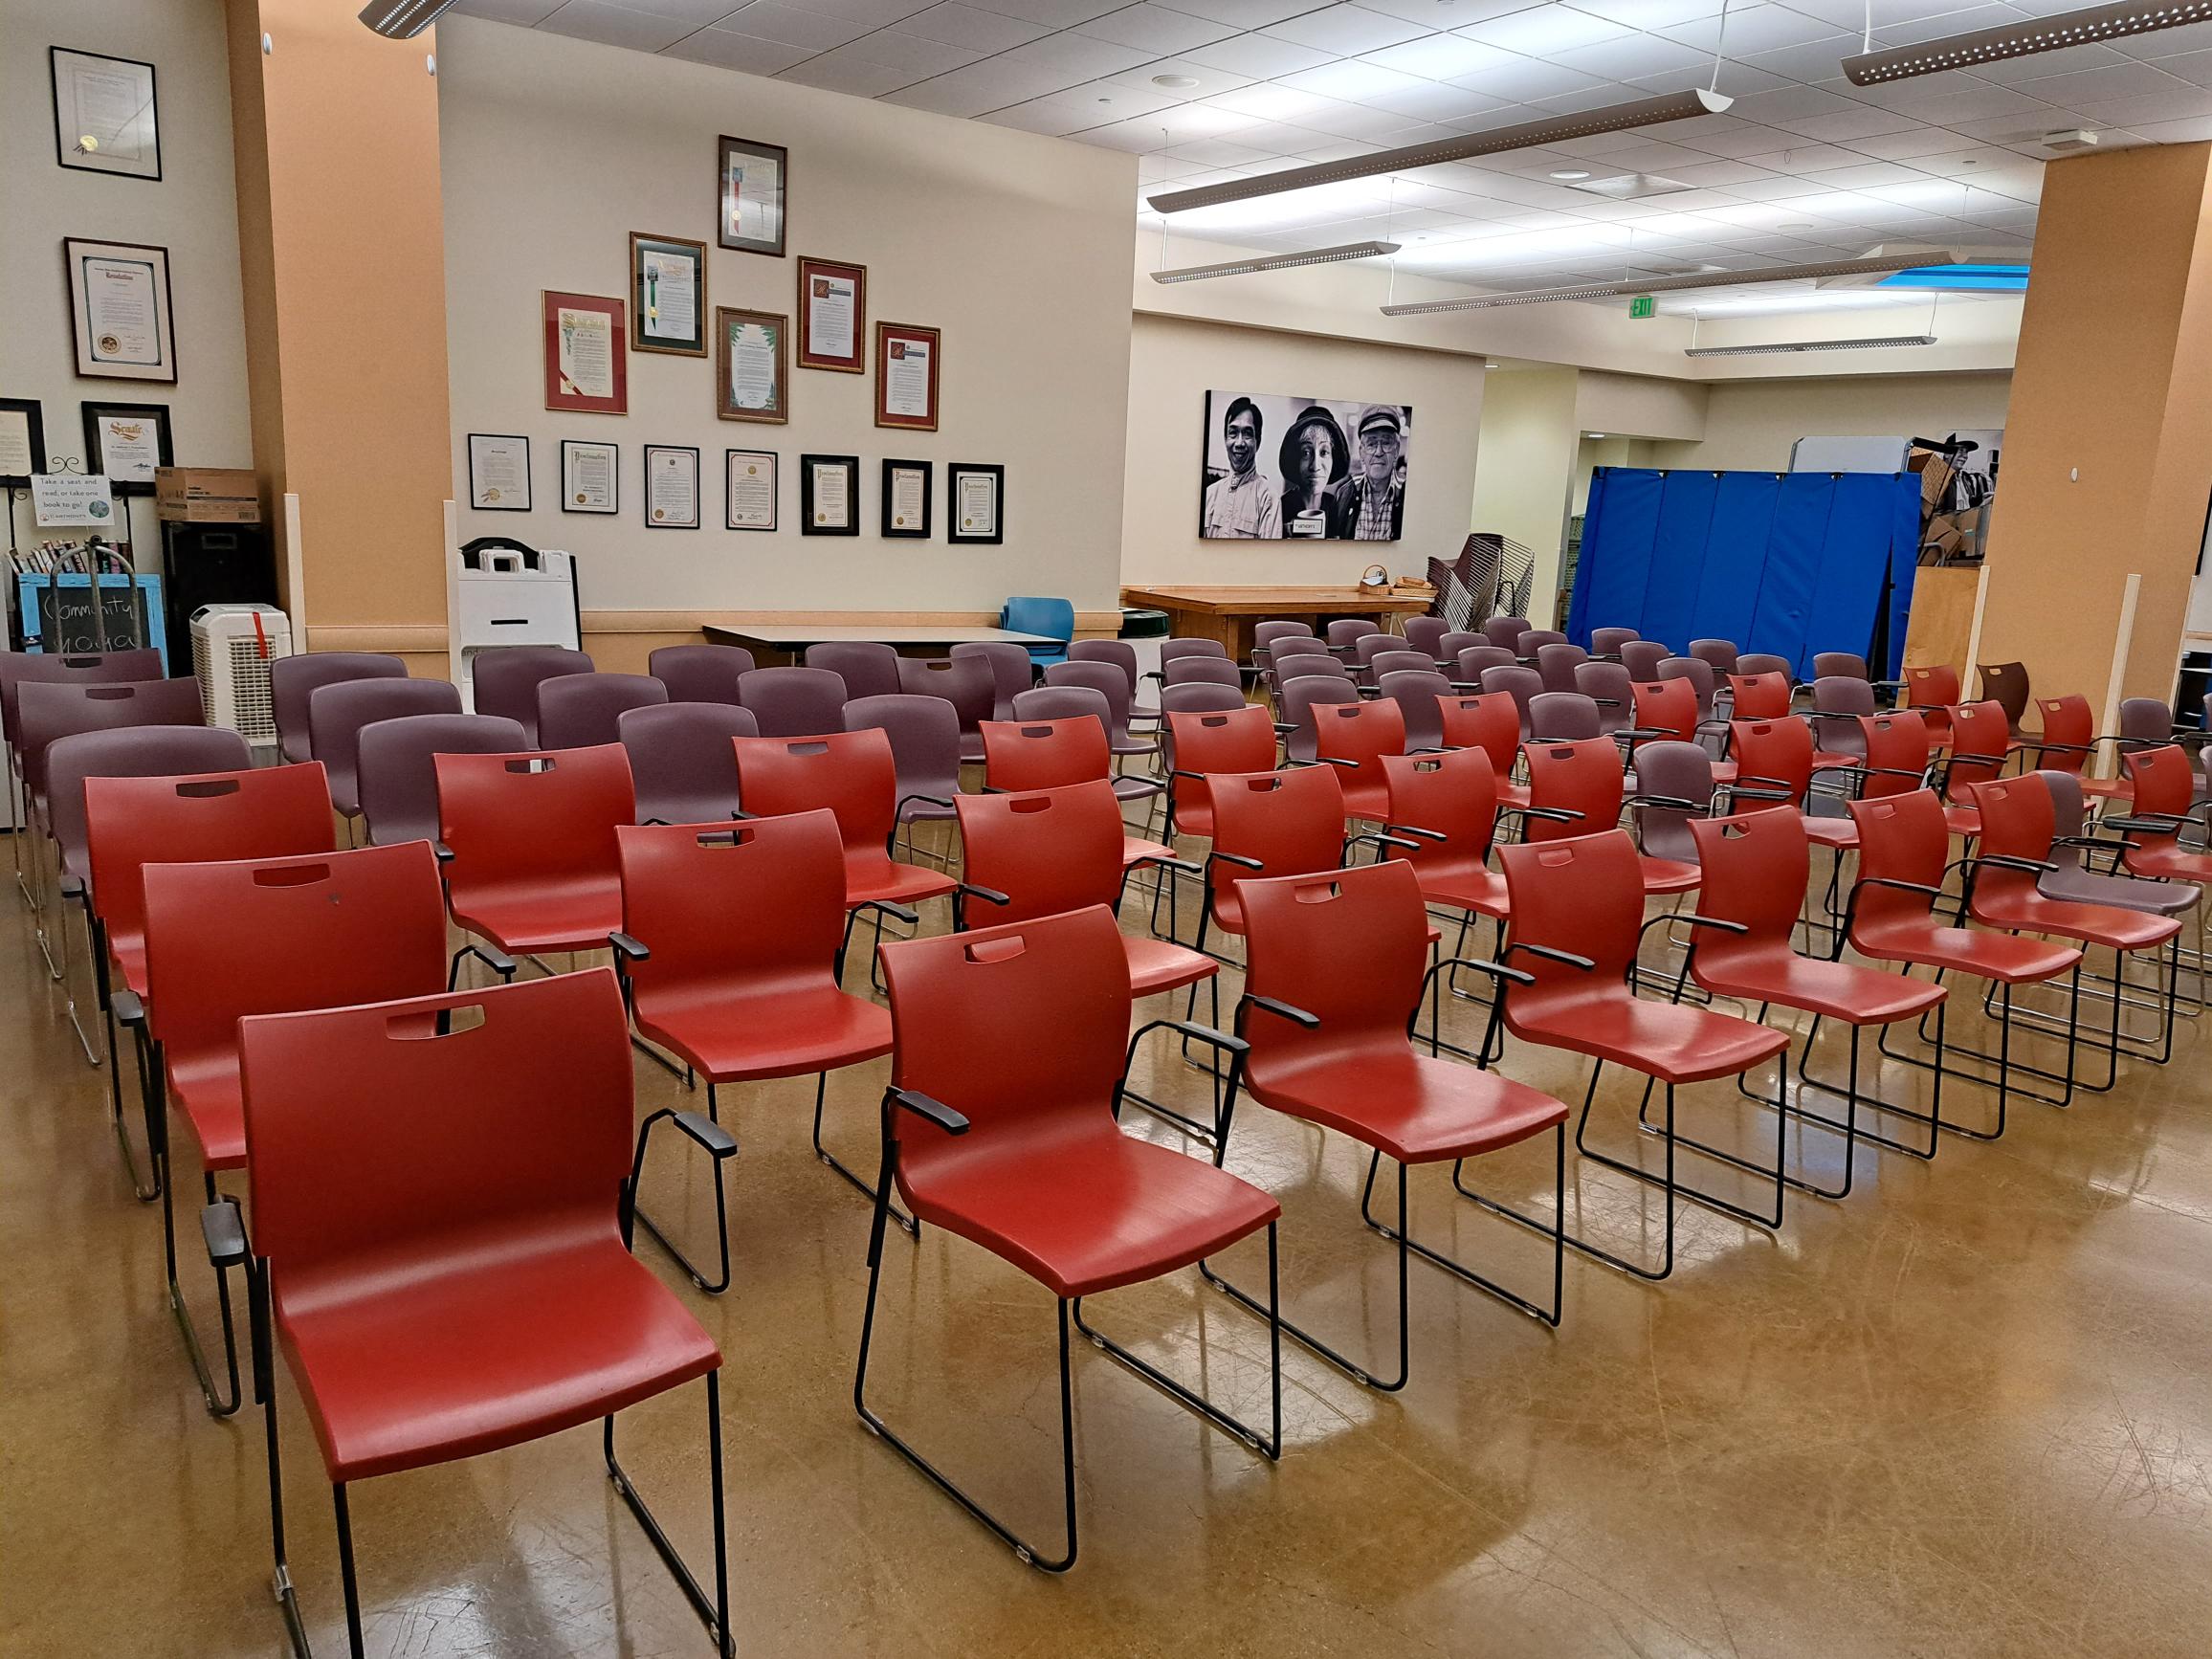 St. Anthony’s Offers Free Use of Poverello Room to Non-Profit Community Partners